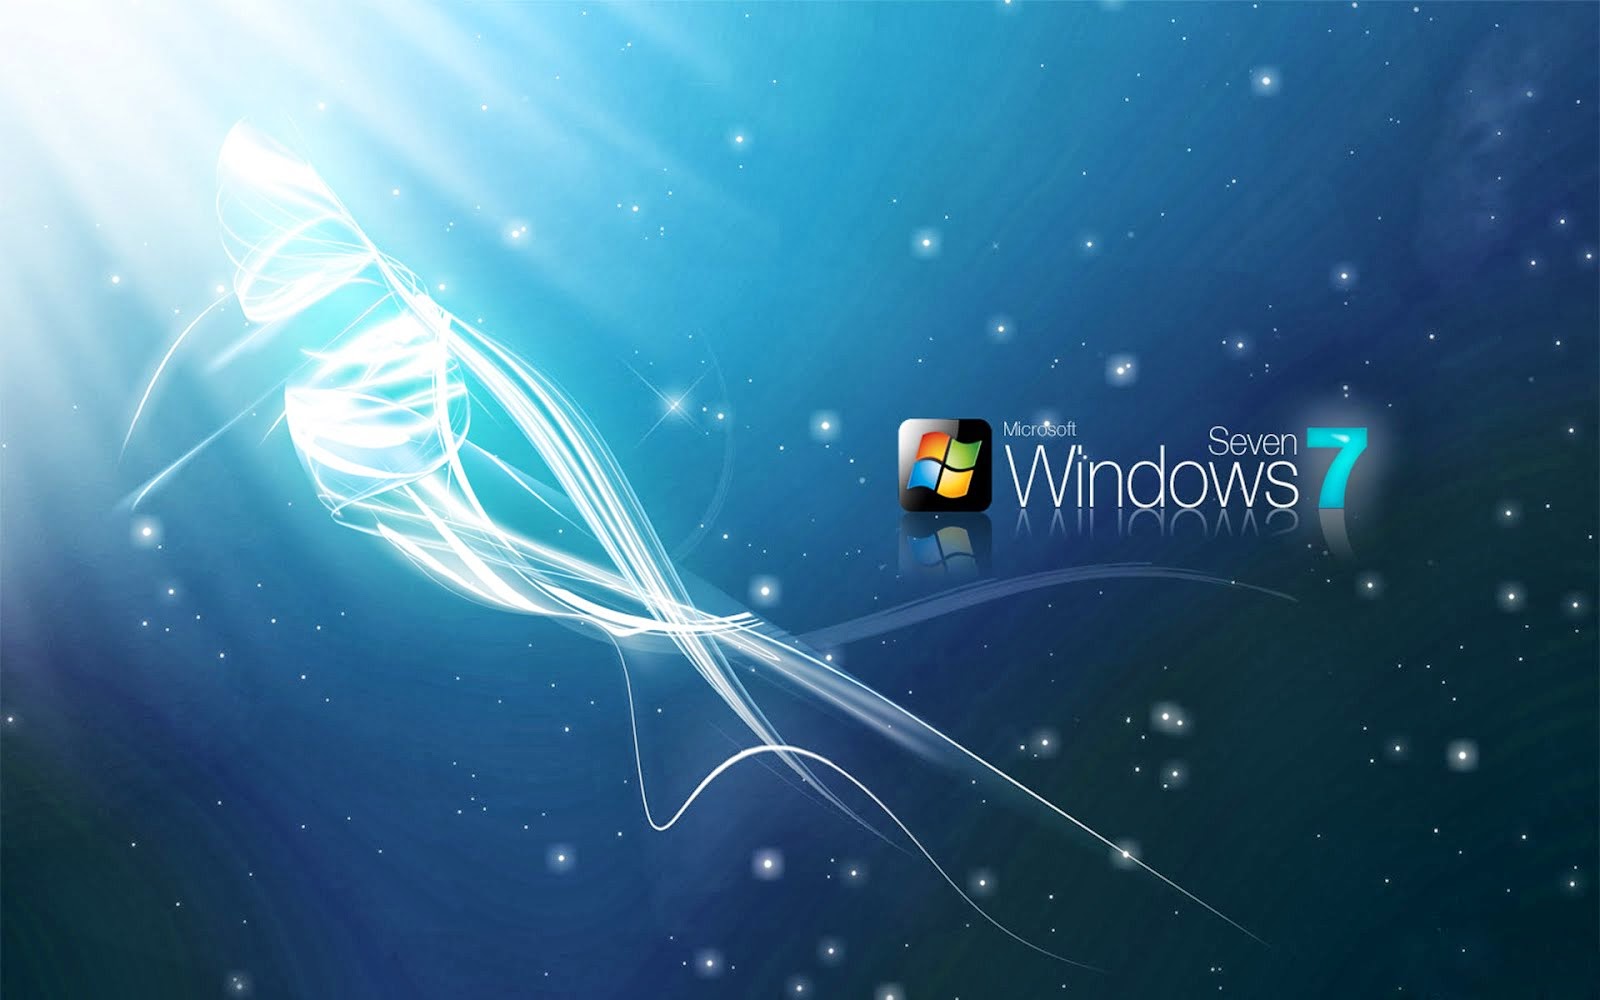 HD Wallpapers Pics: Hd 3d Wallpapers For Windows 7